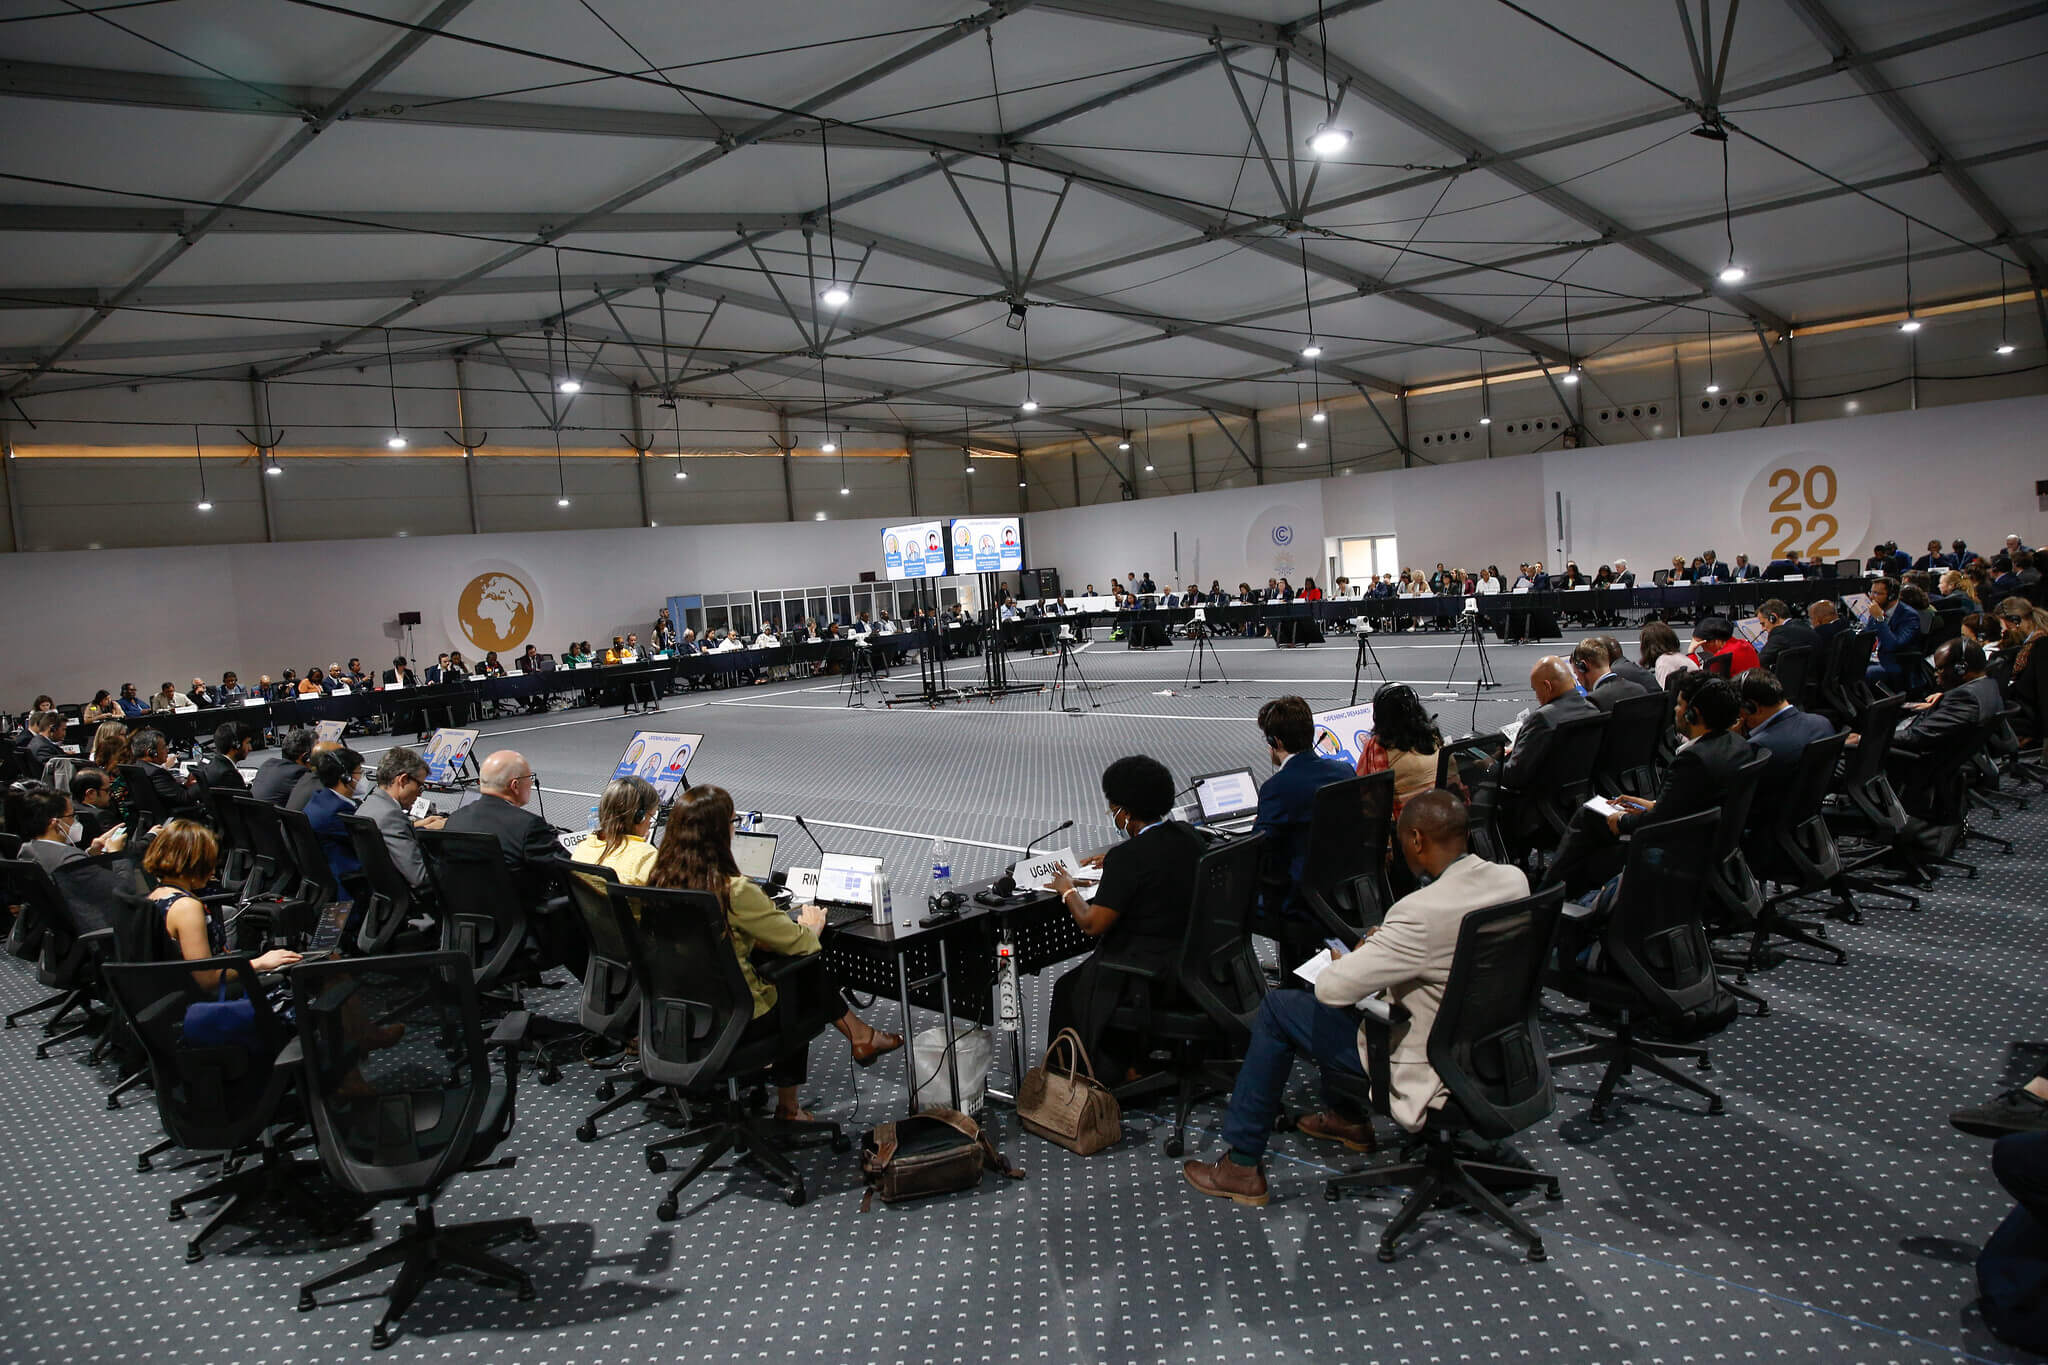 a large, brightly lit conference room full of people sitting in chairs